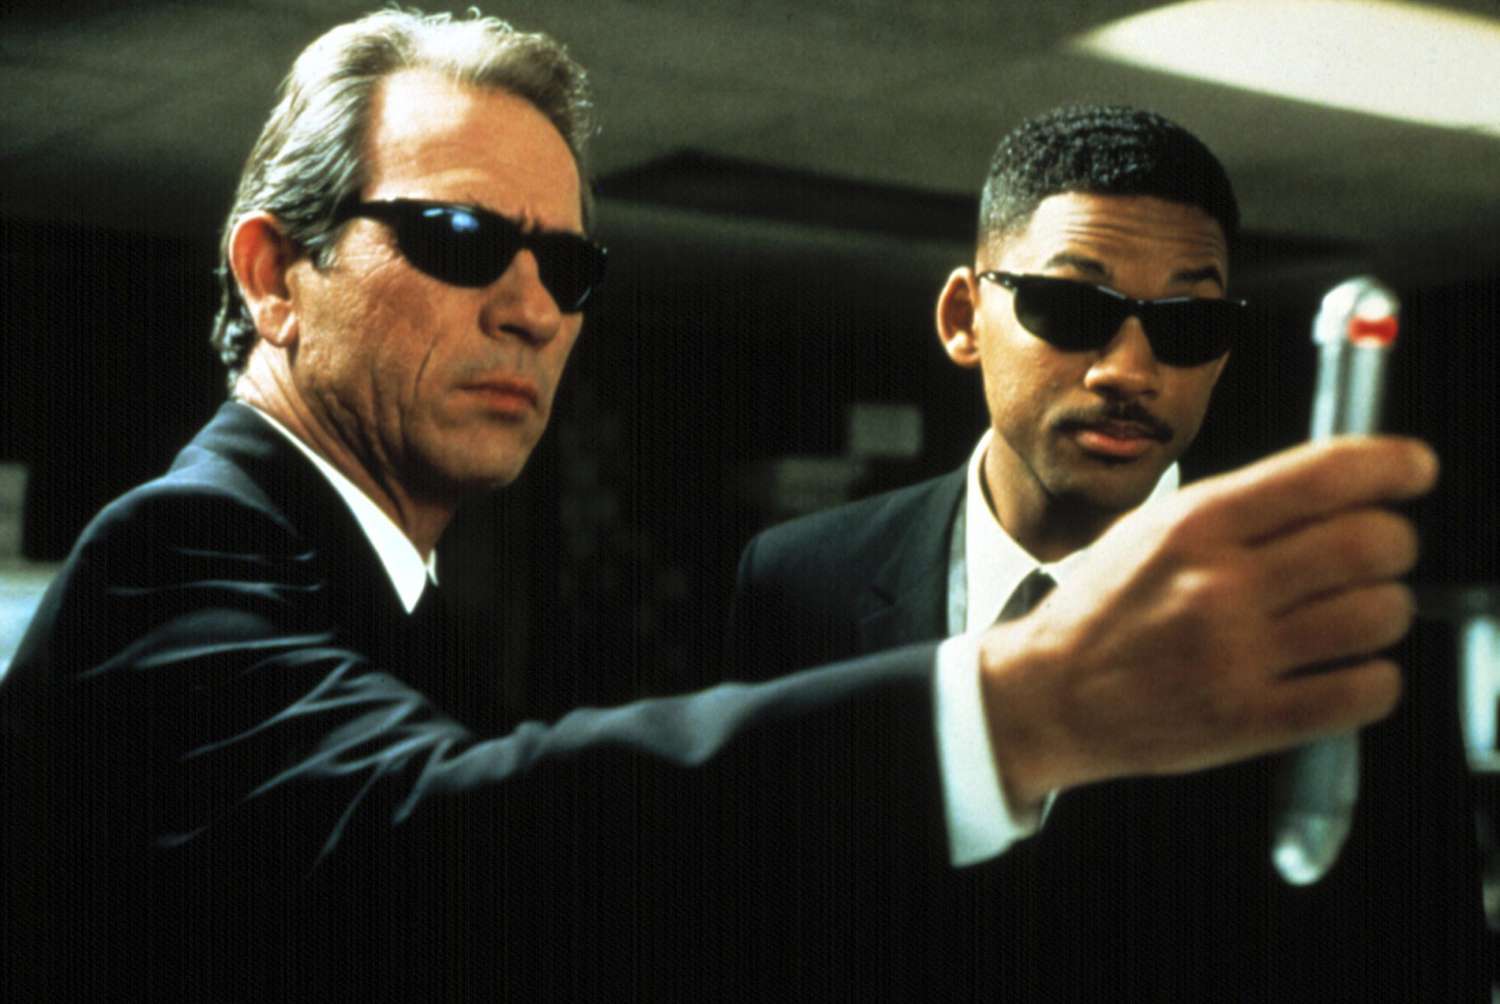 MEN IN BLACK, Tommy Lee Jones, Will Smith, 1997. (c) Columbia Pictures/ Courtesy: Everett Collection